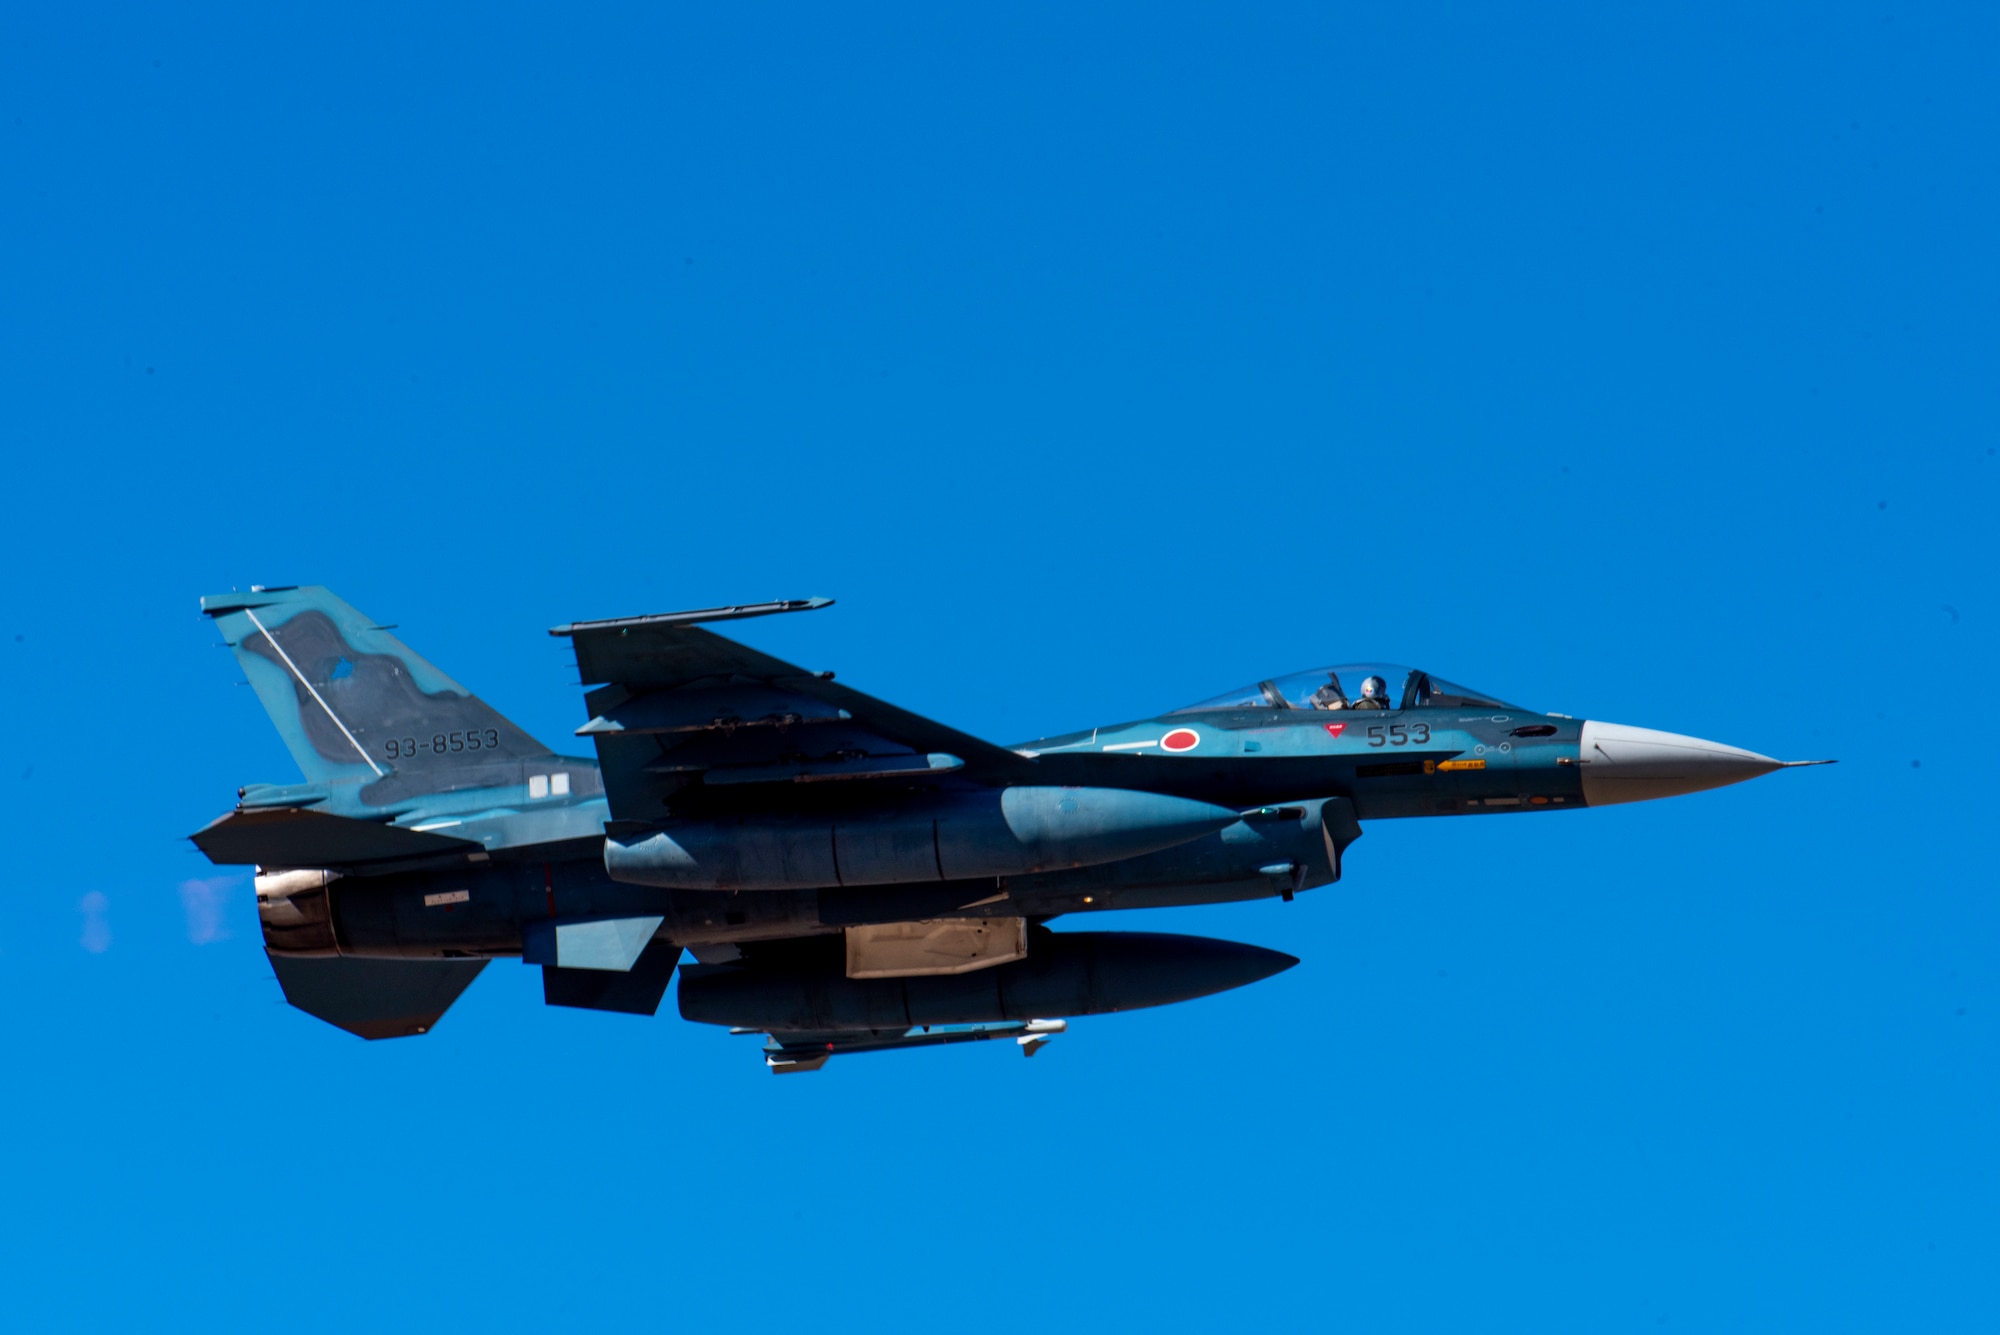 A Japan Air Self-Defense Force F-2 takes off from Hyakuri Air Base, Japan in support of the Aviation Training Relocation exercise Jan. 29, 2024.